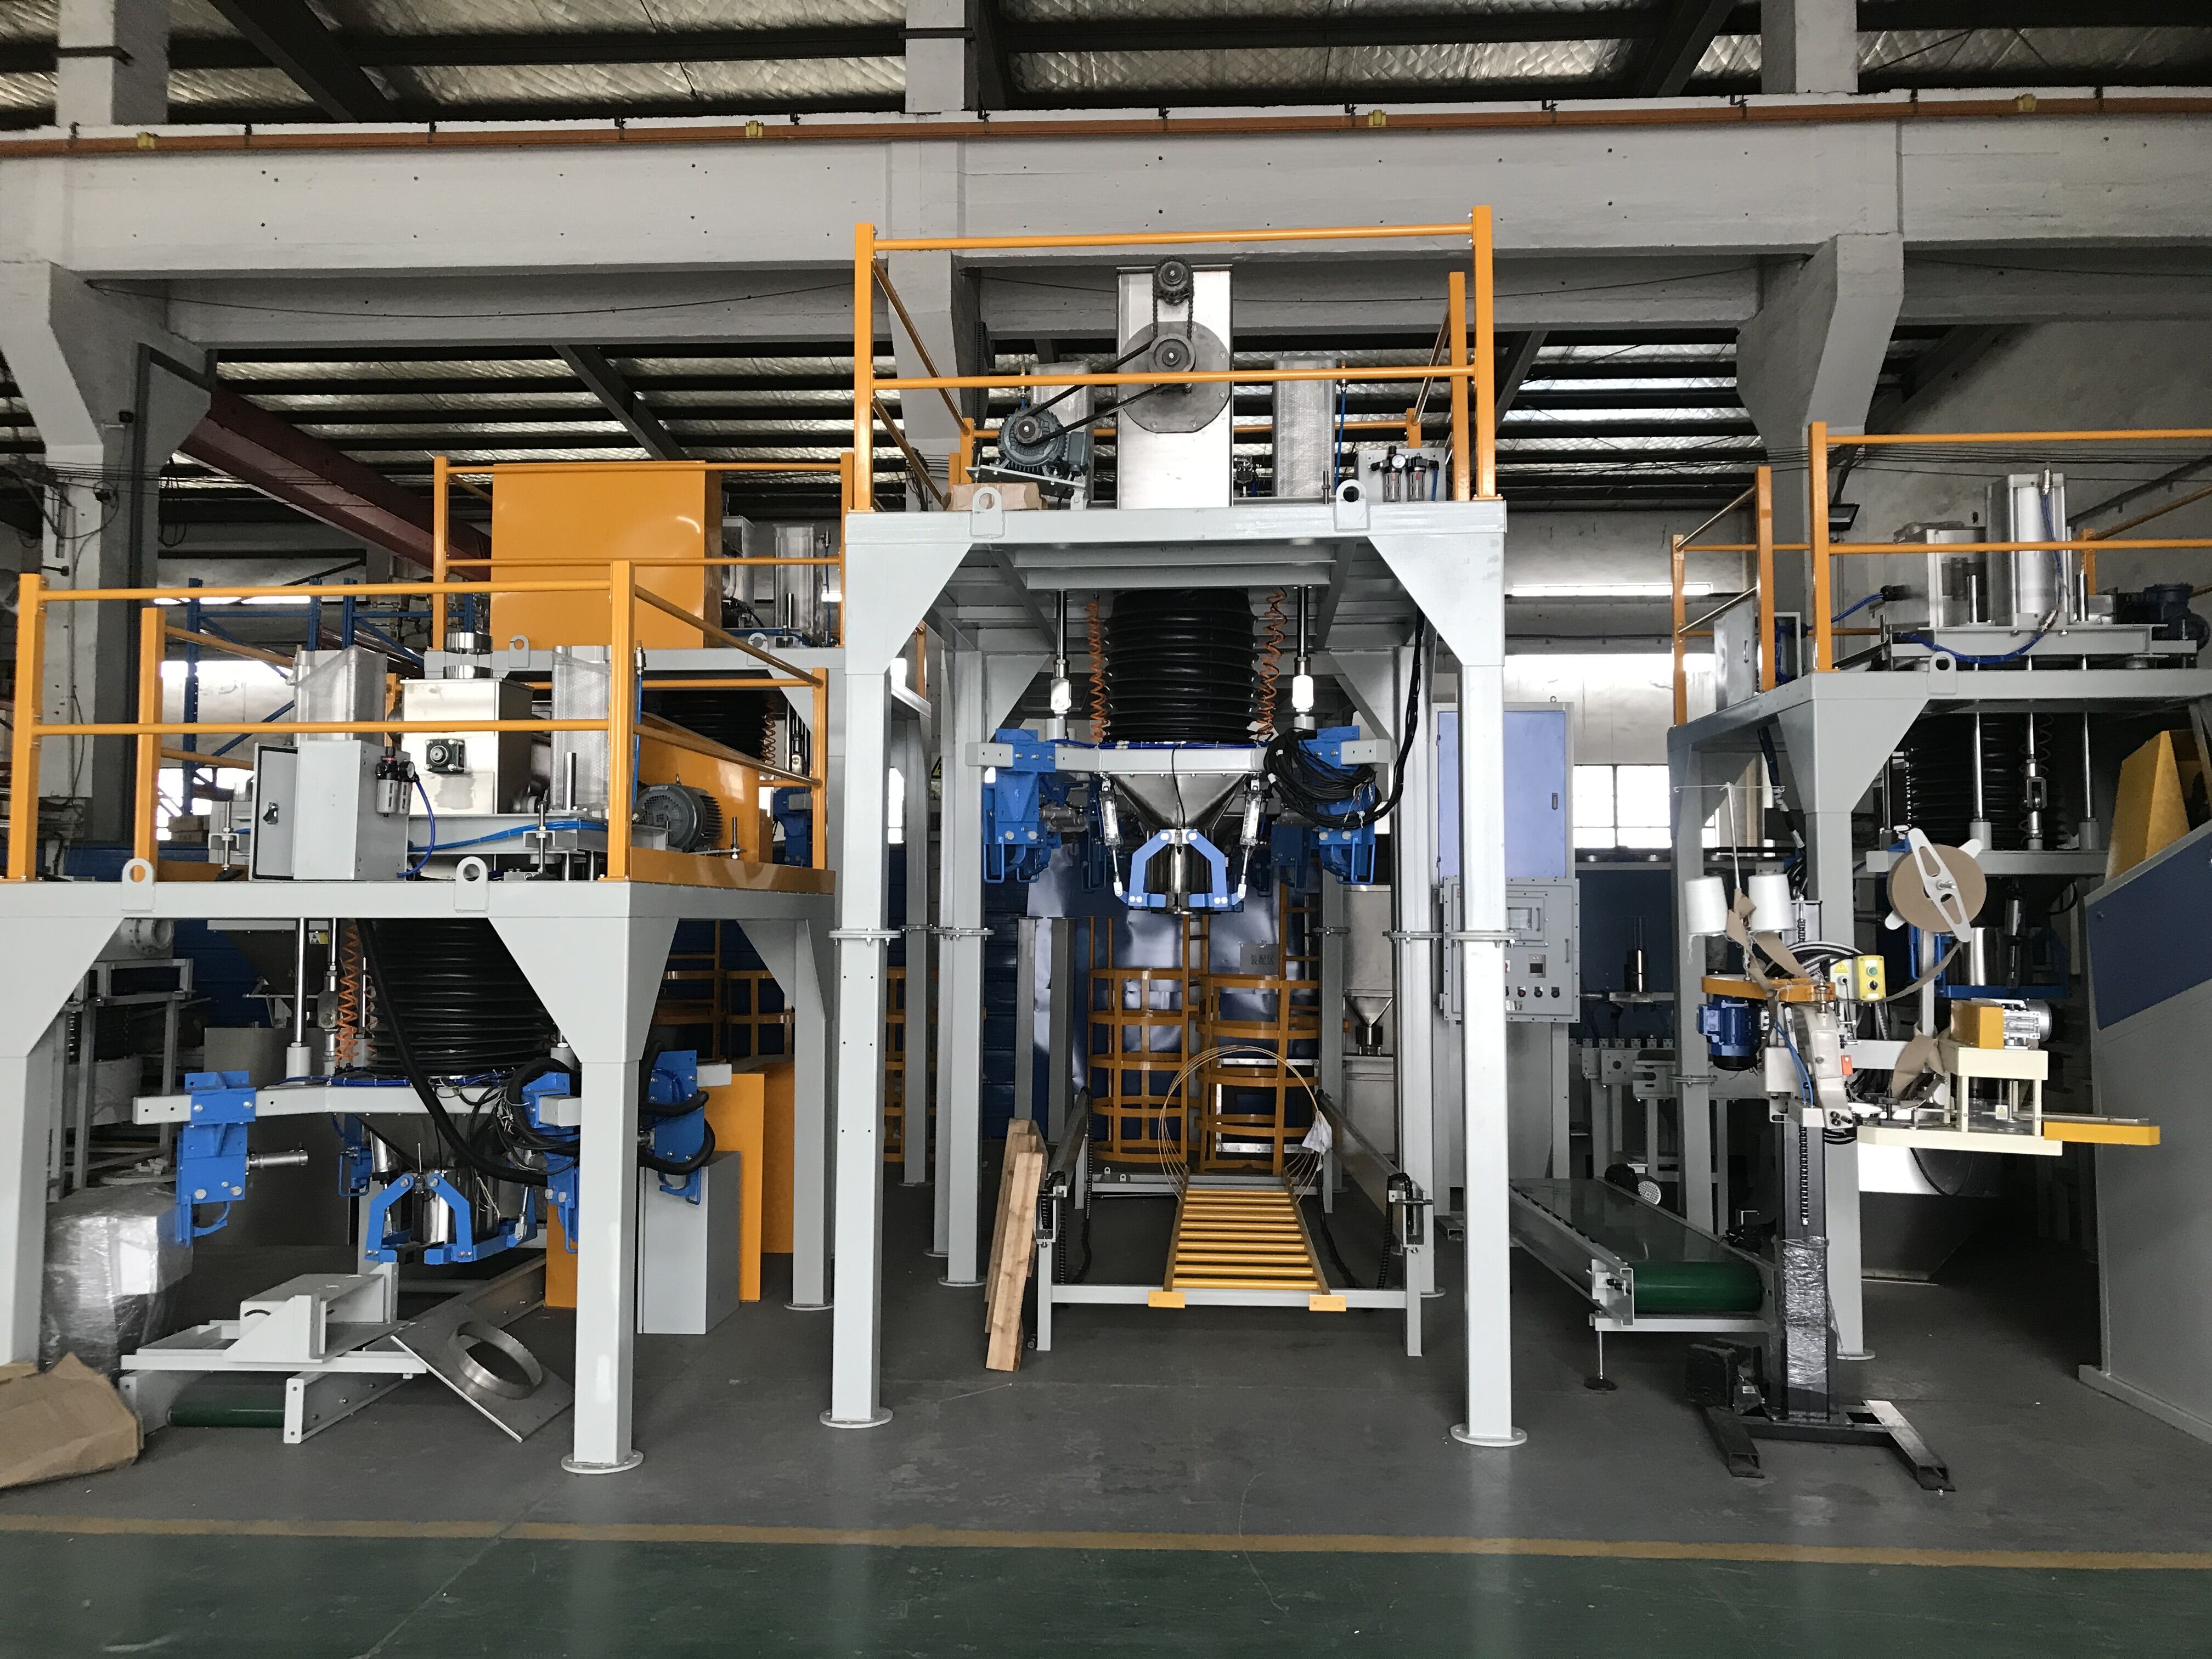 automatic packing machine SSP Single Super Phosphate bagging machine fully Automatic Packing Palletizing Line, Fully Automatic Packing Line, Fully Automatic Bagging Line, Fully Automatic filling and p